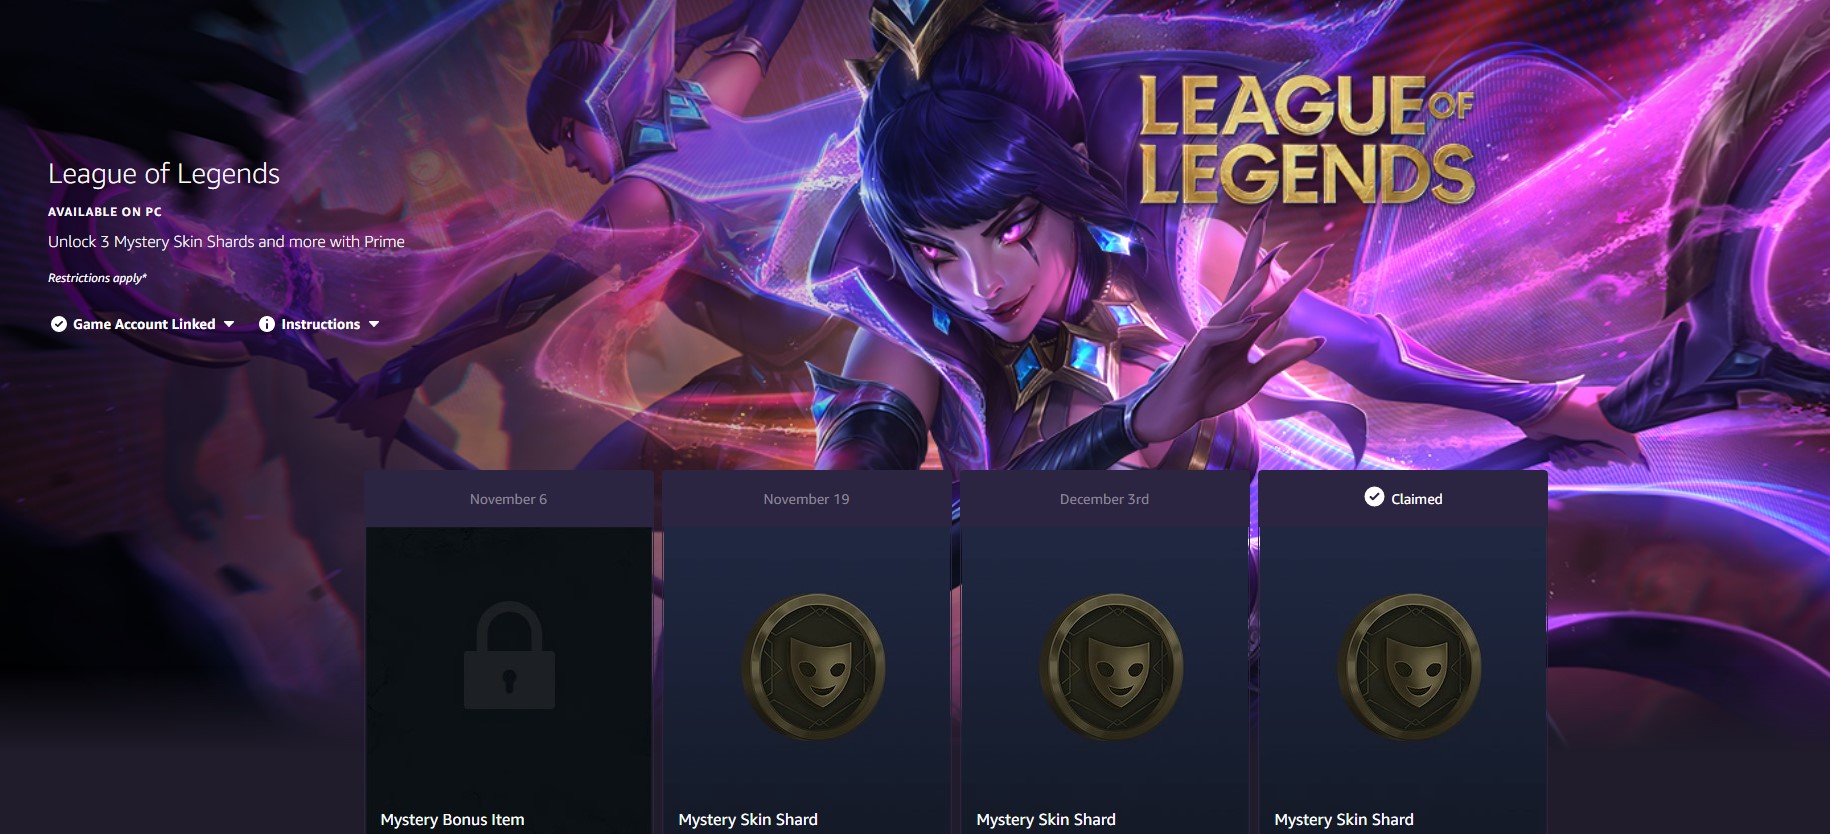 New League of Legends skin shard is available Gaming users until Nov. 6 - Dot Esports